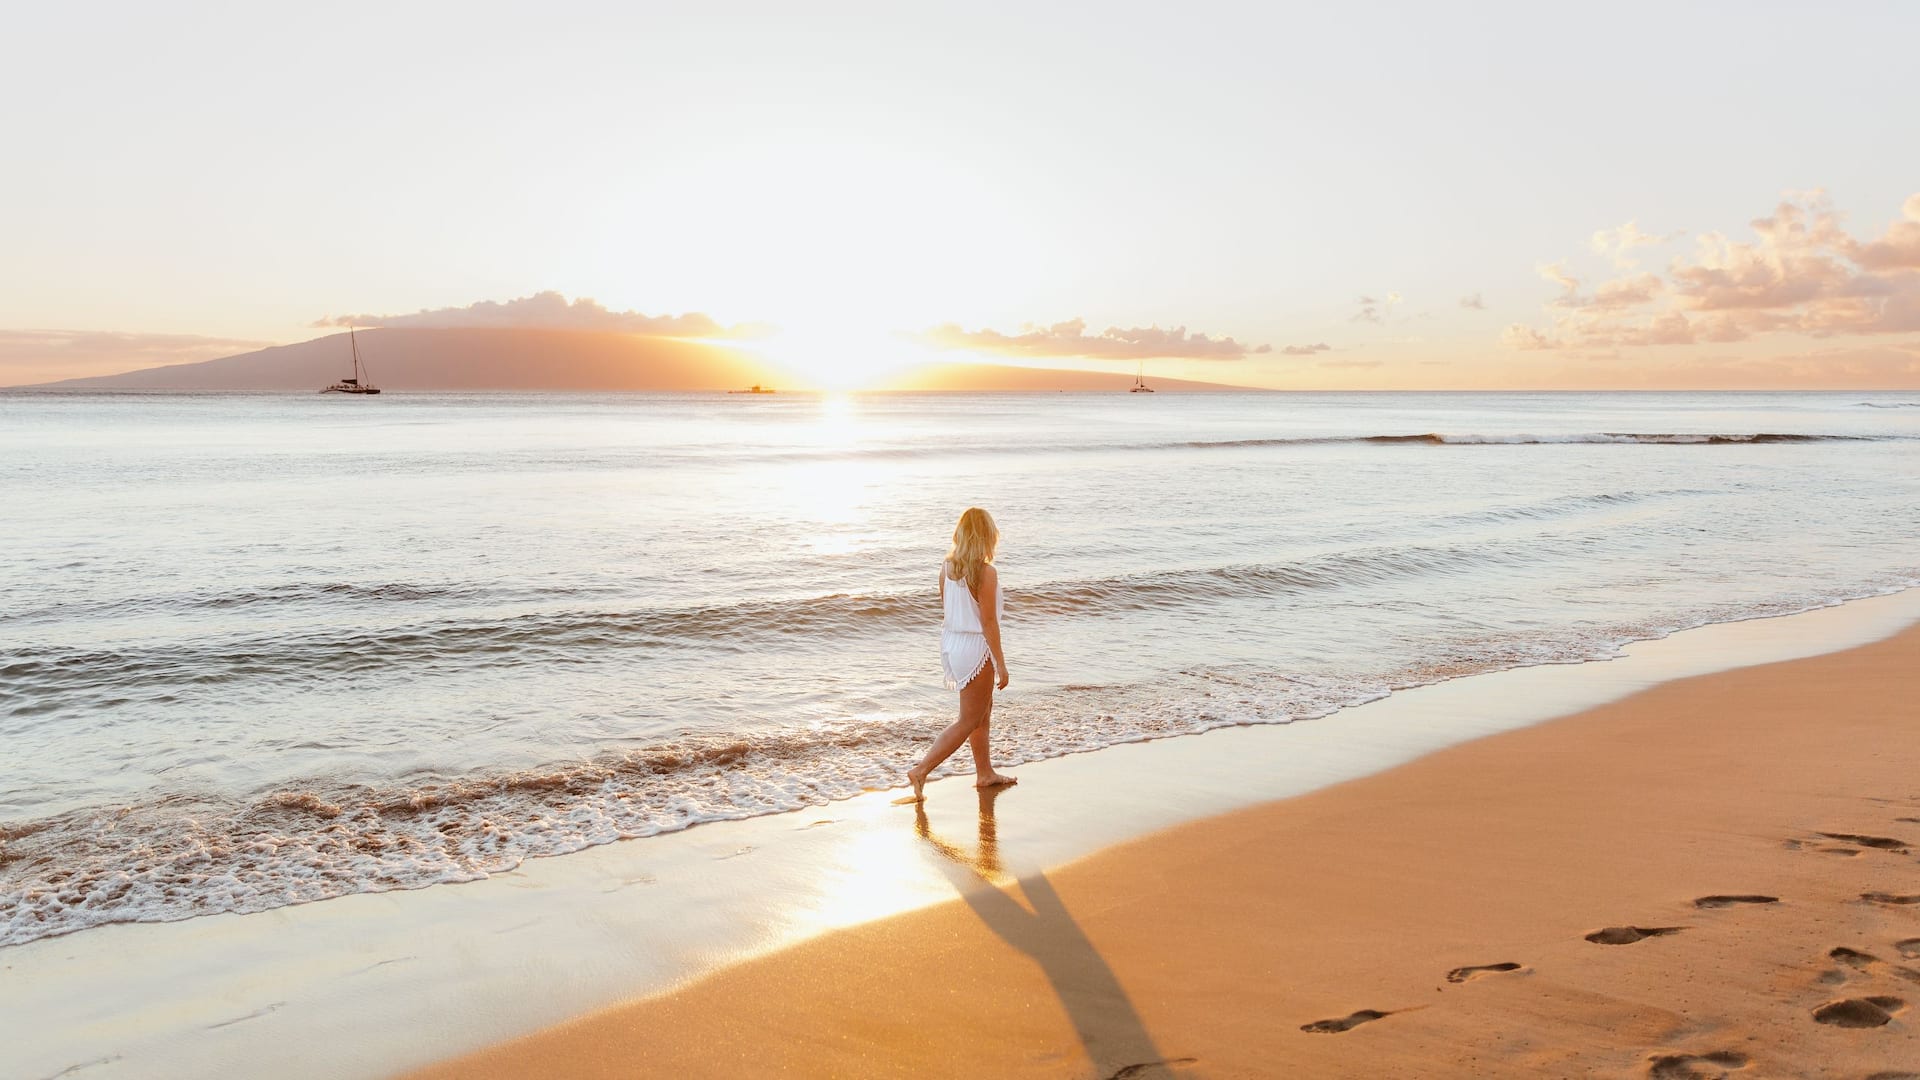 Girl walking at the beach with sunset view at Hyatt Regency Maui Resort and Spa